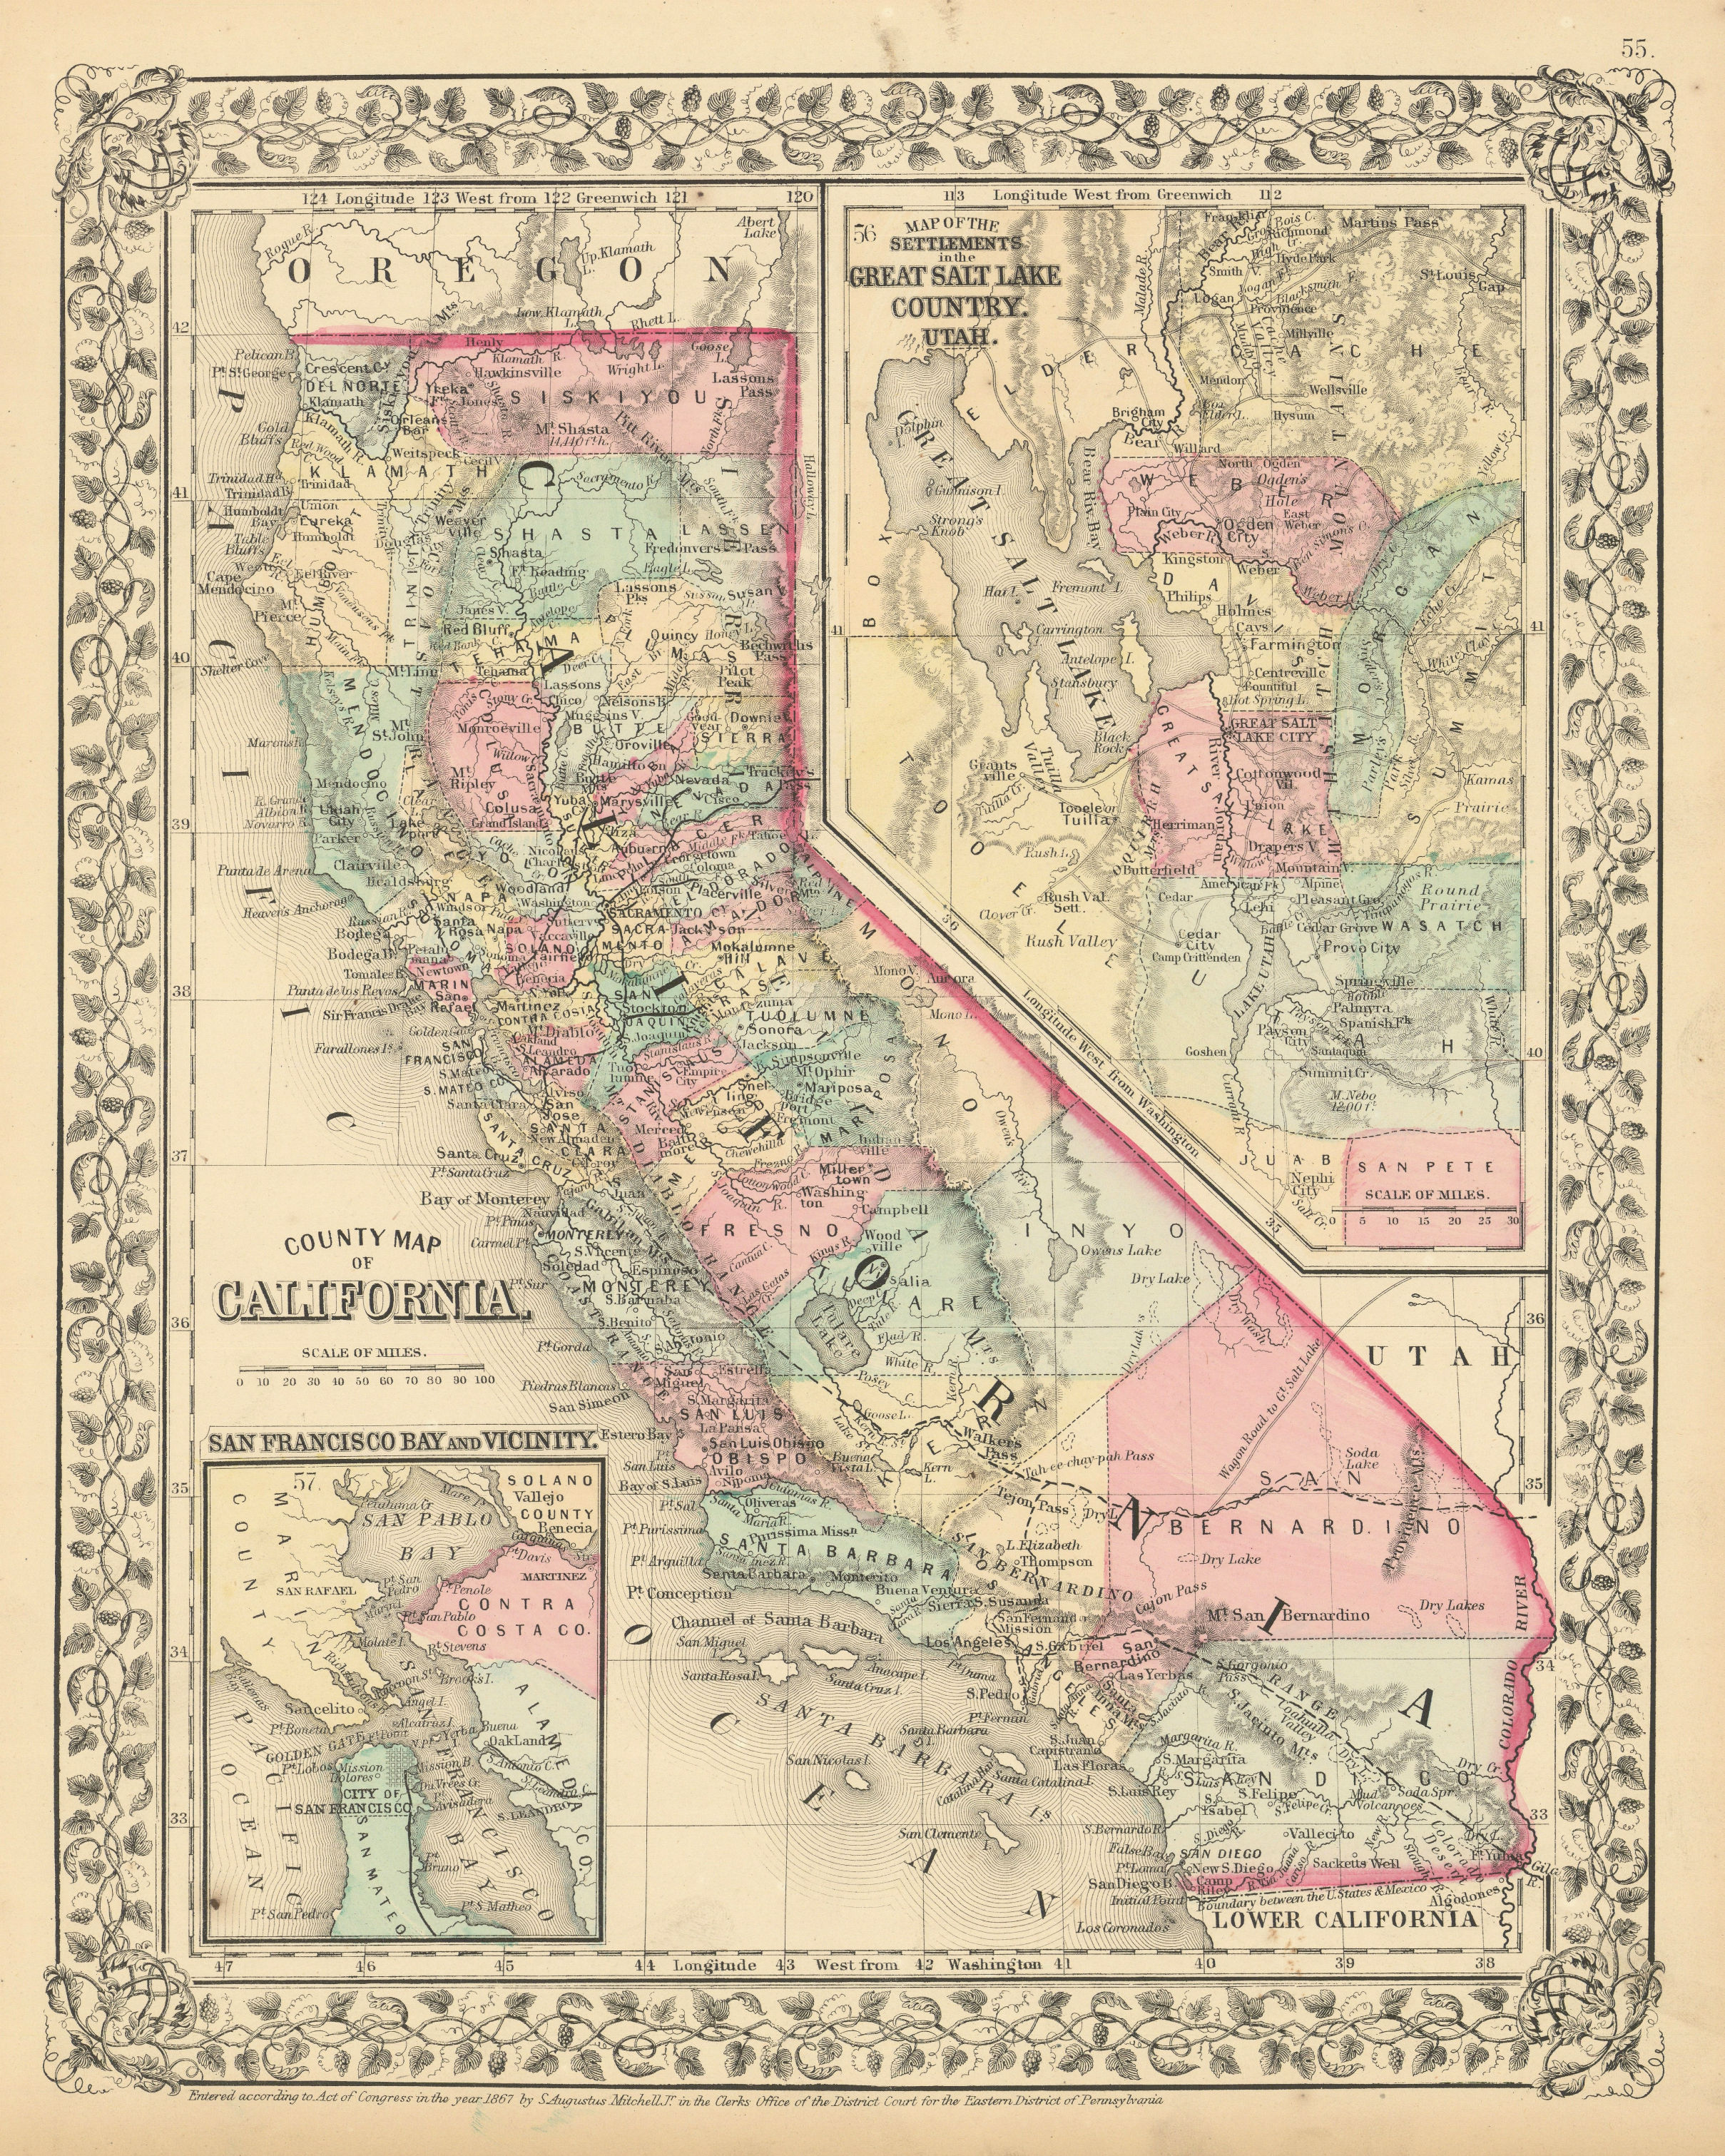 Associate Product County map of California. The Great Salt Lake Country, Utah. MITCHELL 1869